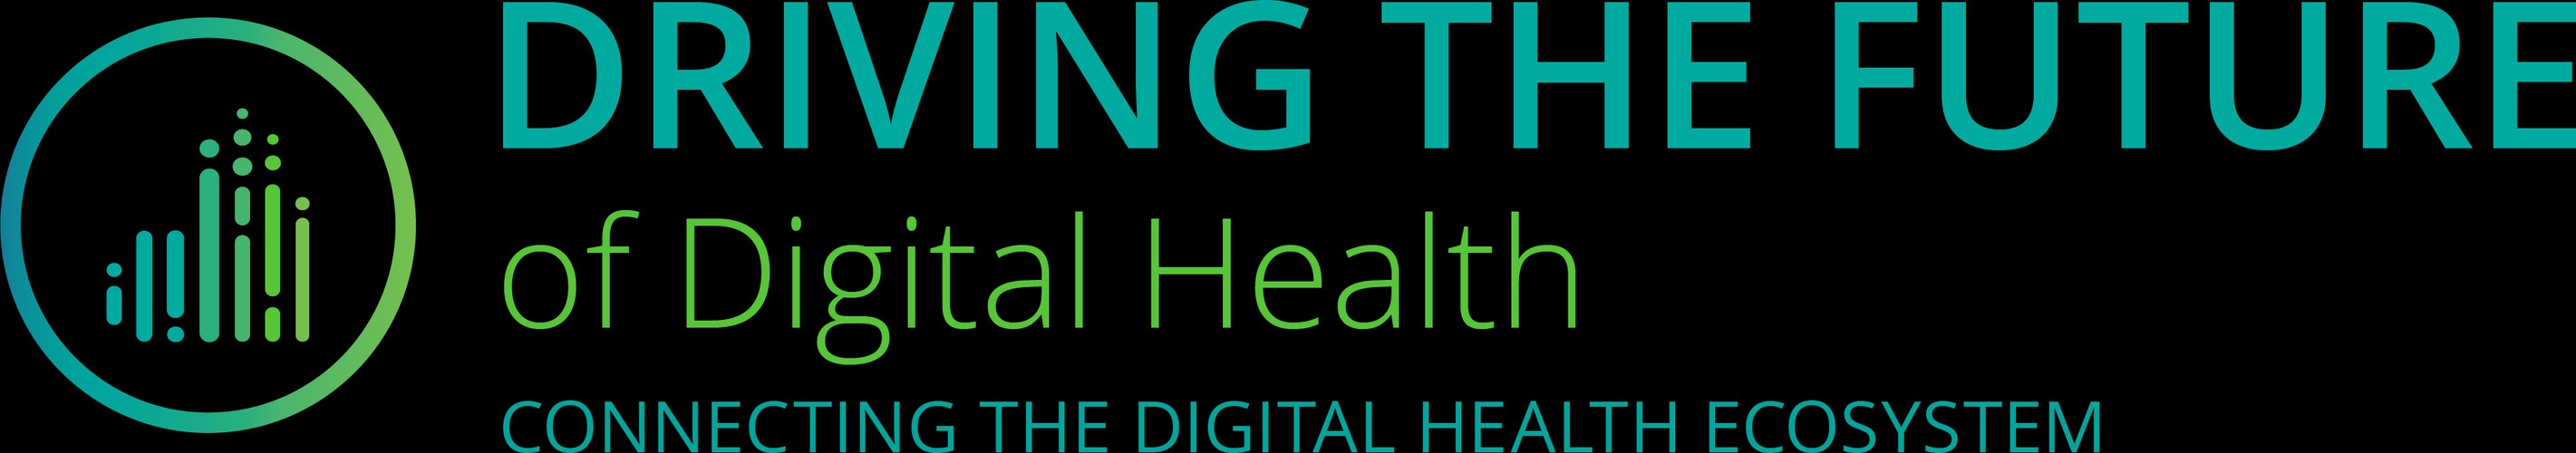 Driving the Future of Digital Health 2021